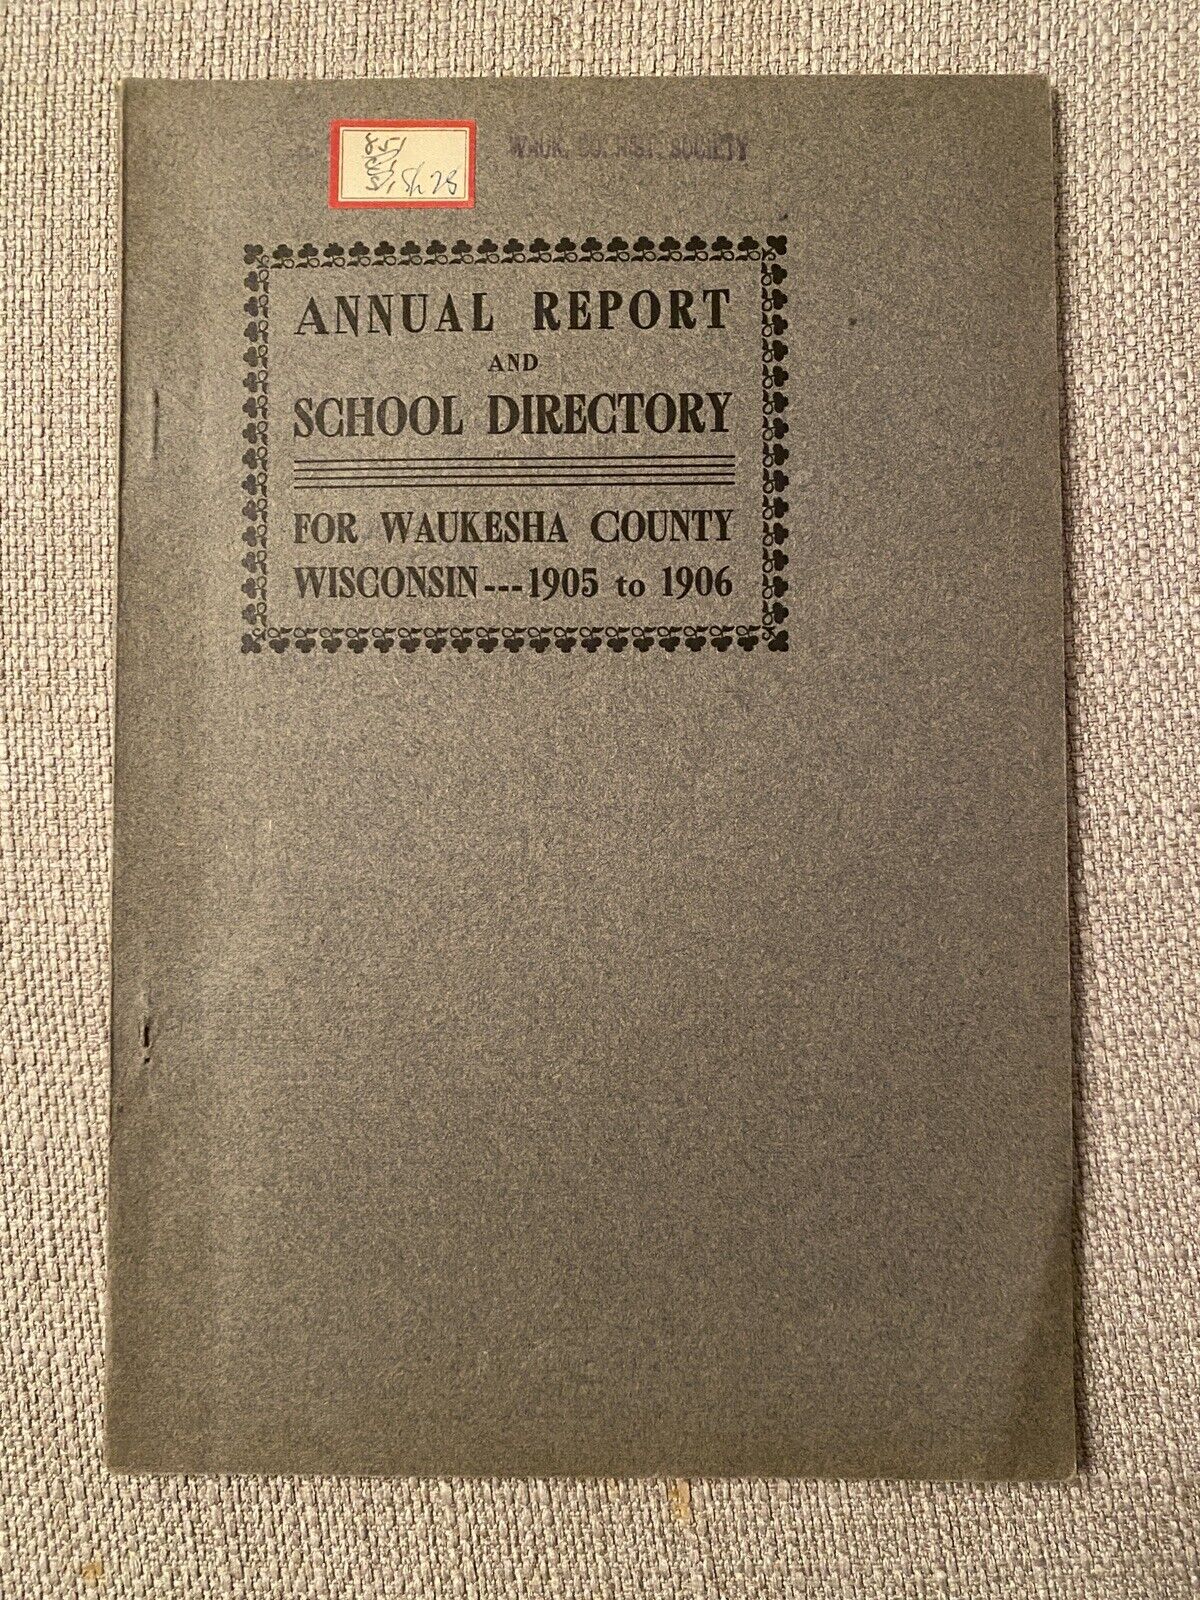 Waukesha County Wisconsin Annual Report And School Directory 1905-1906 Booklet